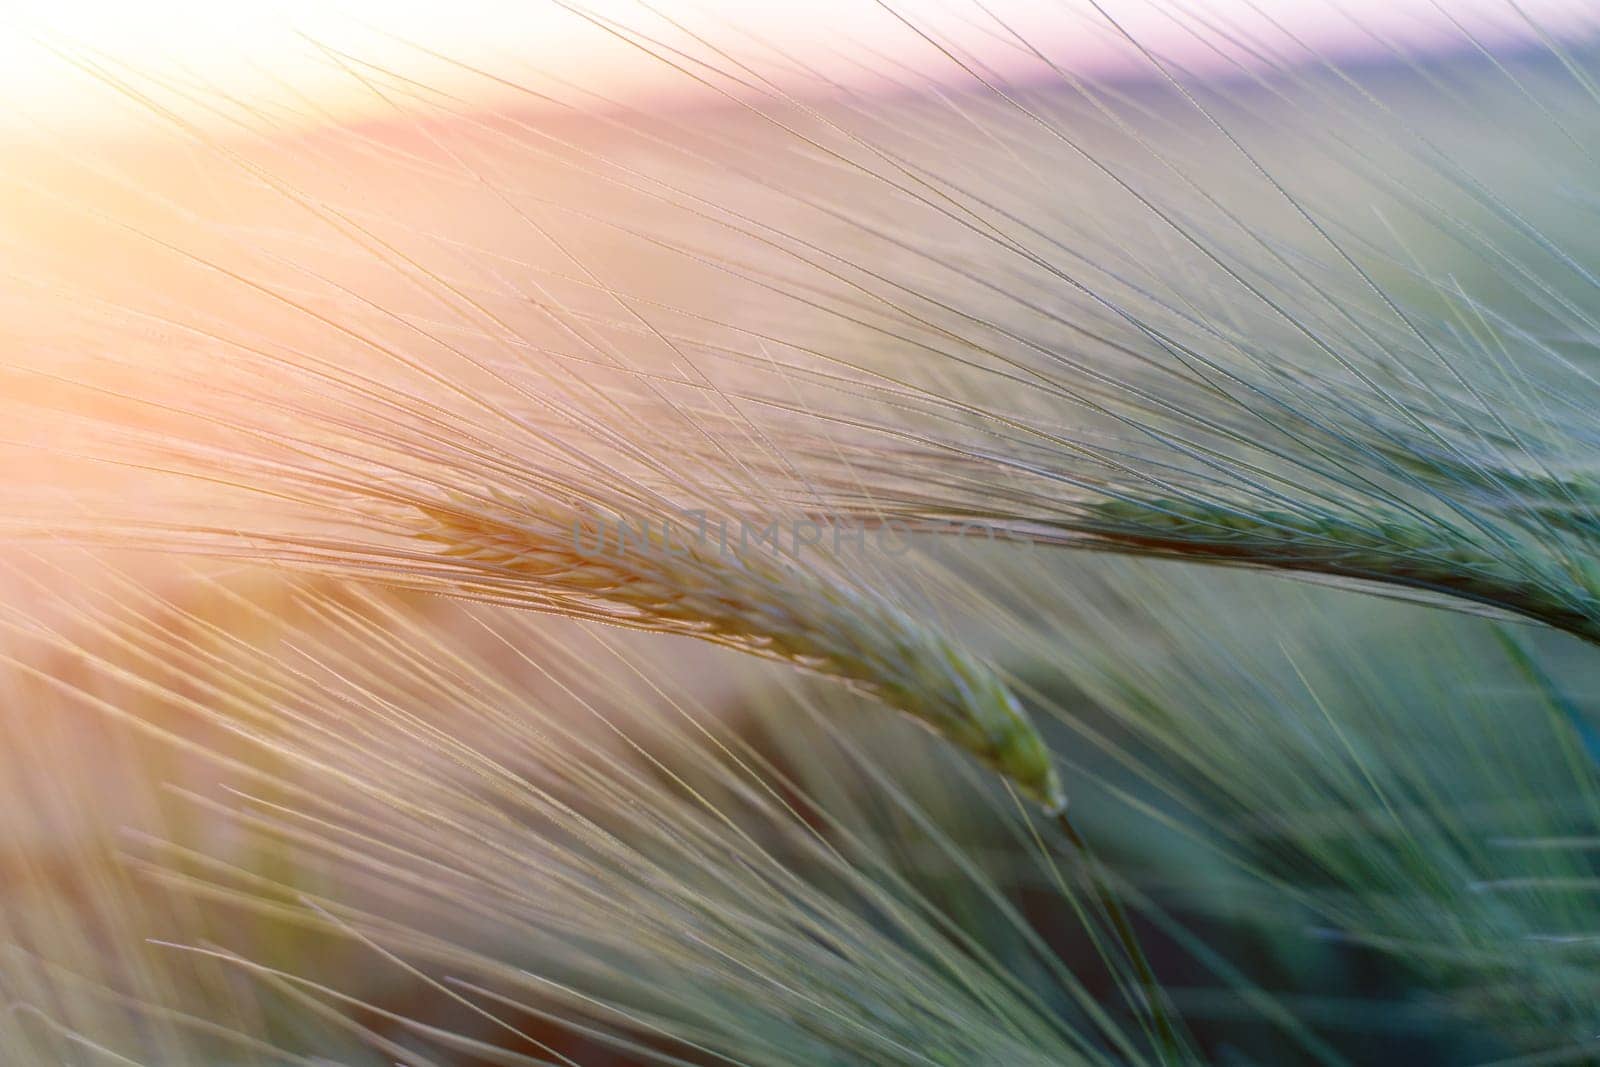 barley with spikes in field, back lit cereal crops plantation in sunset by Matiunina